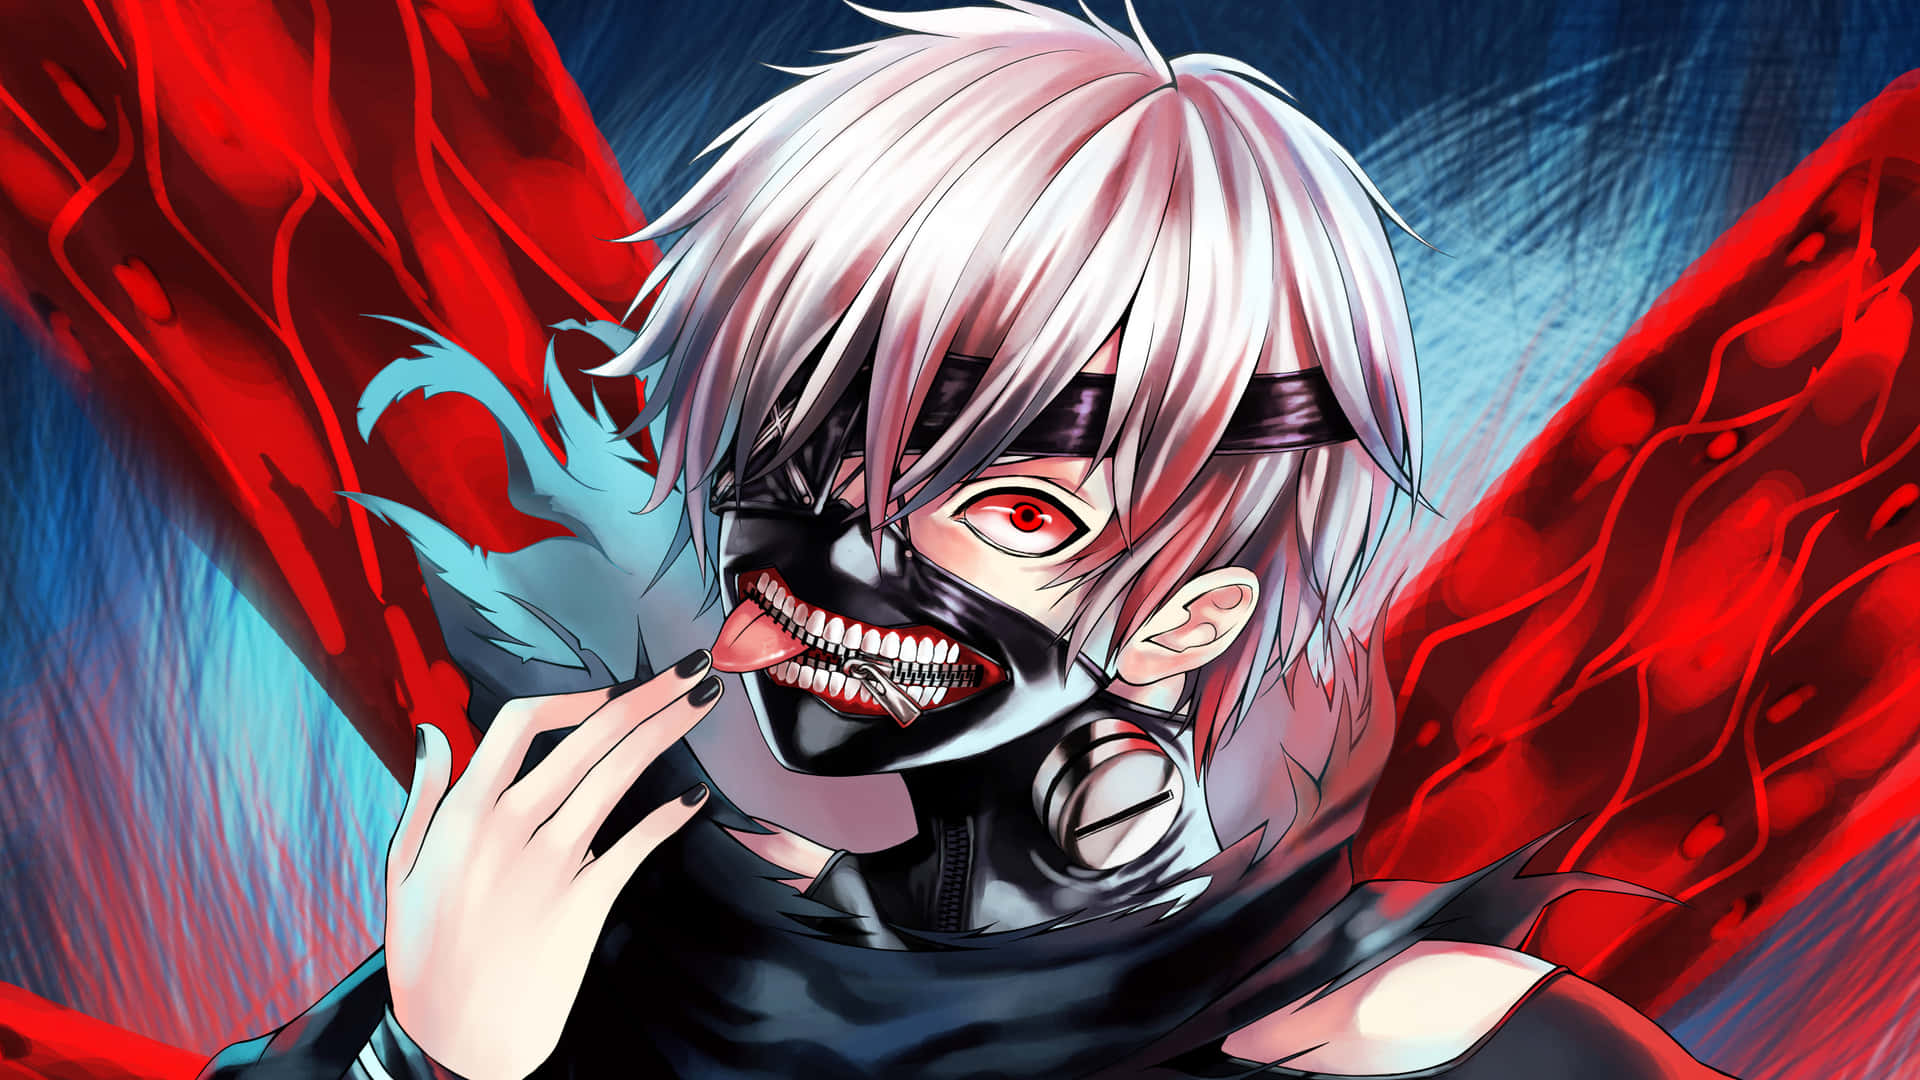 A Look Into The Frightening World Of Tokyo Ghoul